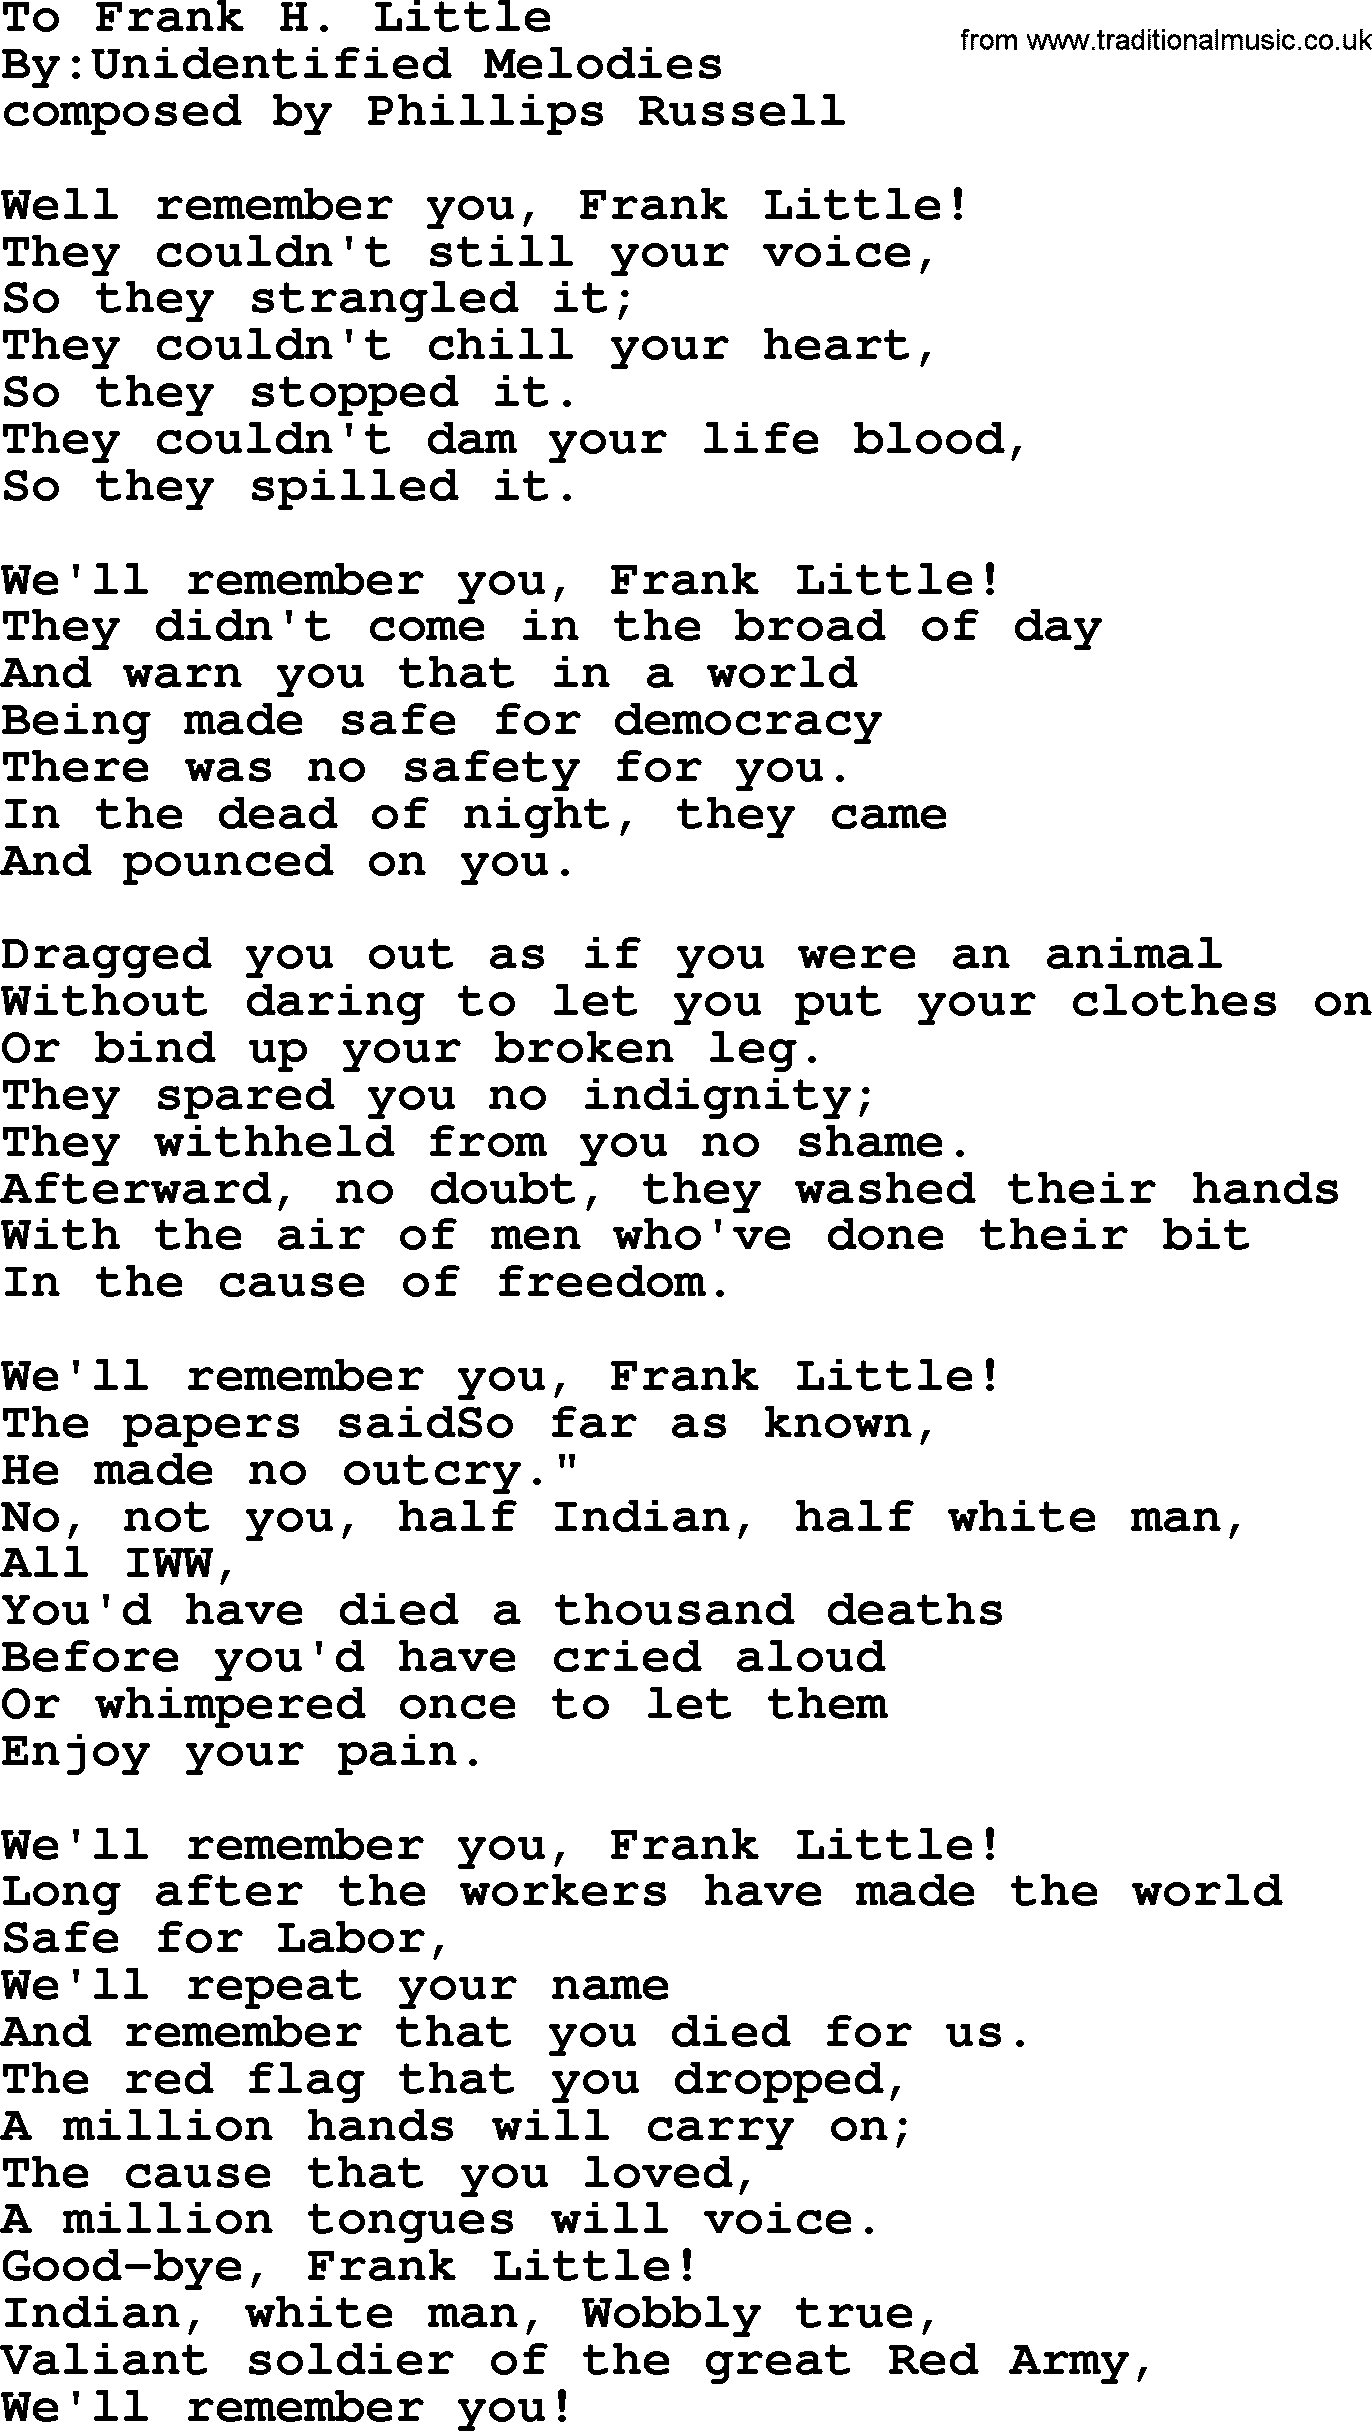 Political, Solidarity, Workers or Union song: To Frank H Little, lyrics